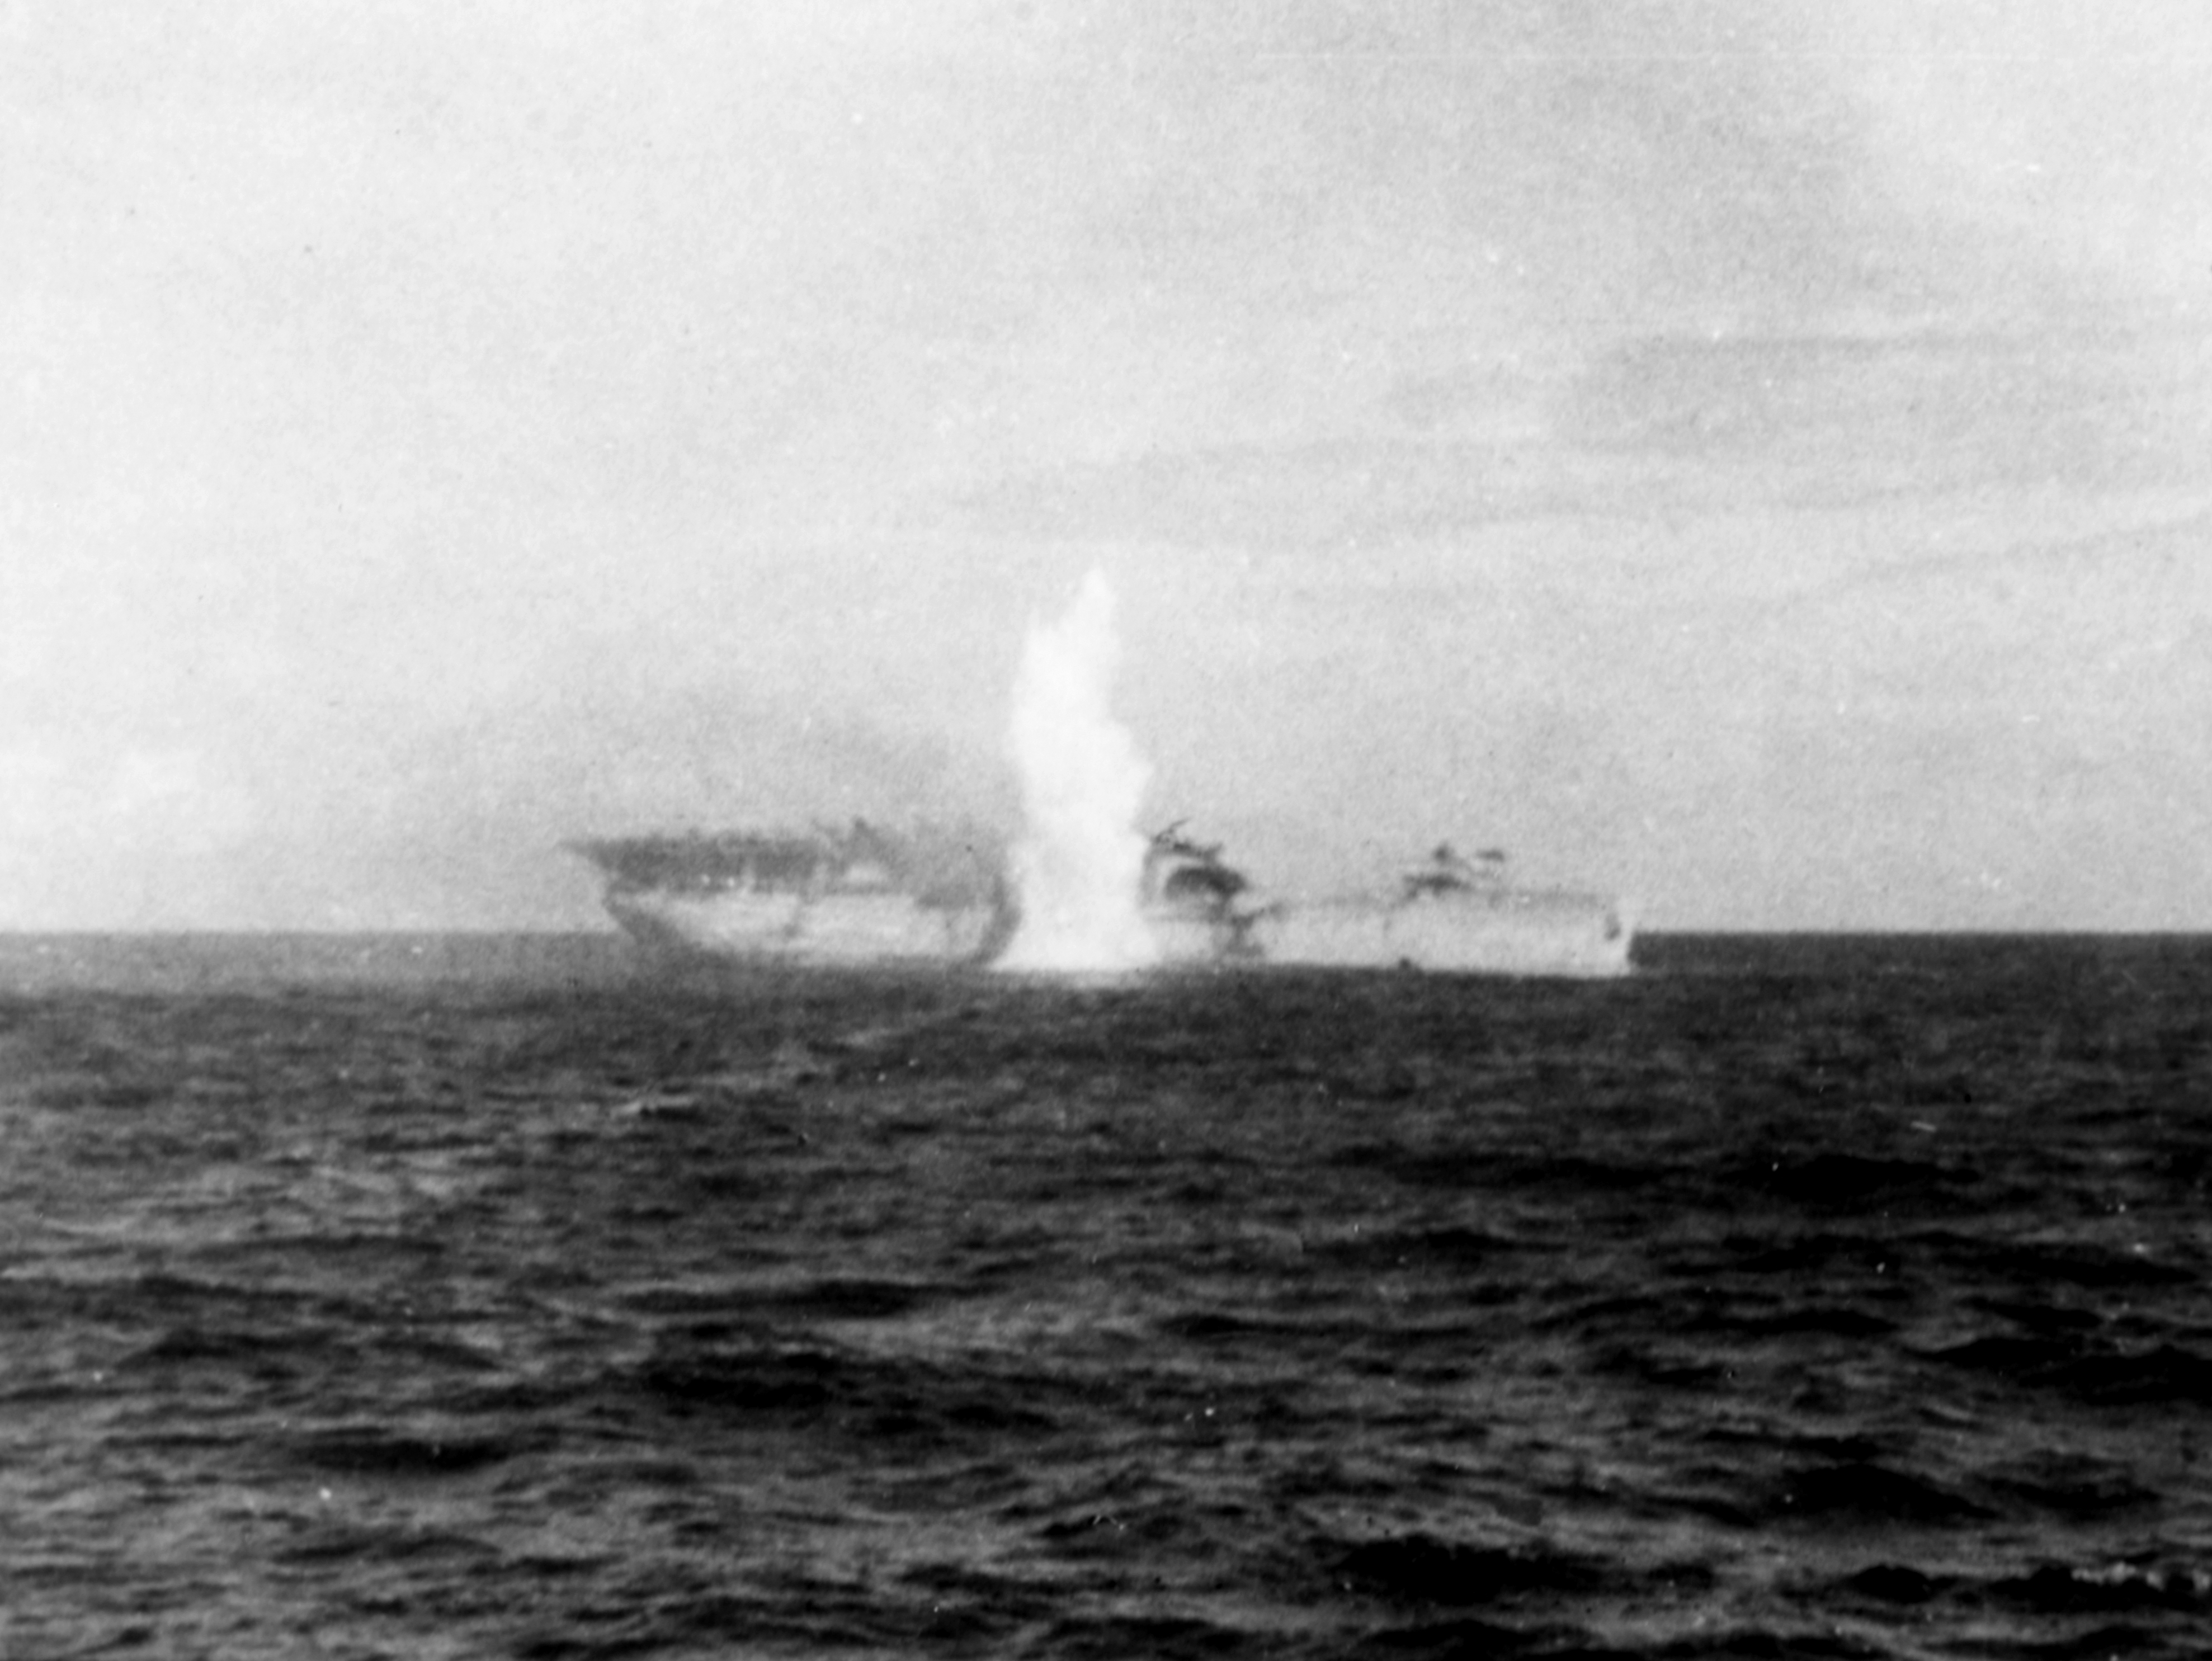 USS Langley is hit by torpedo, 27th February 1942